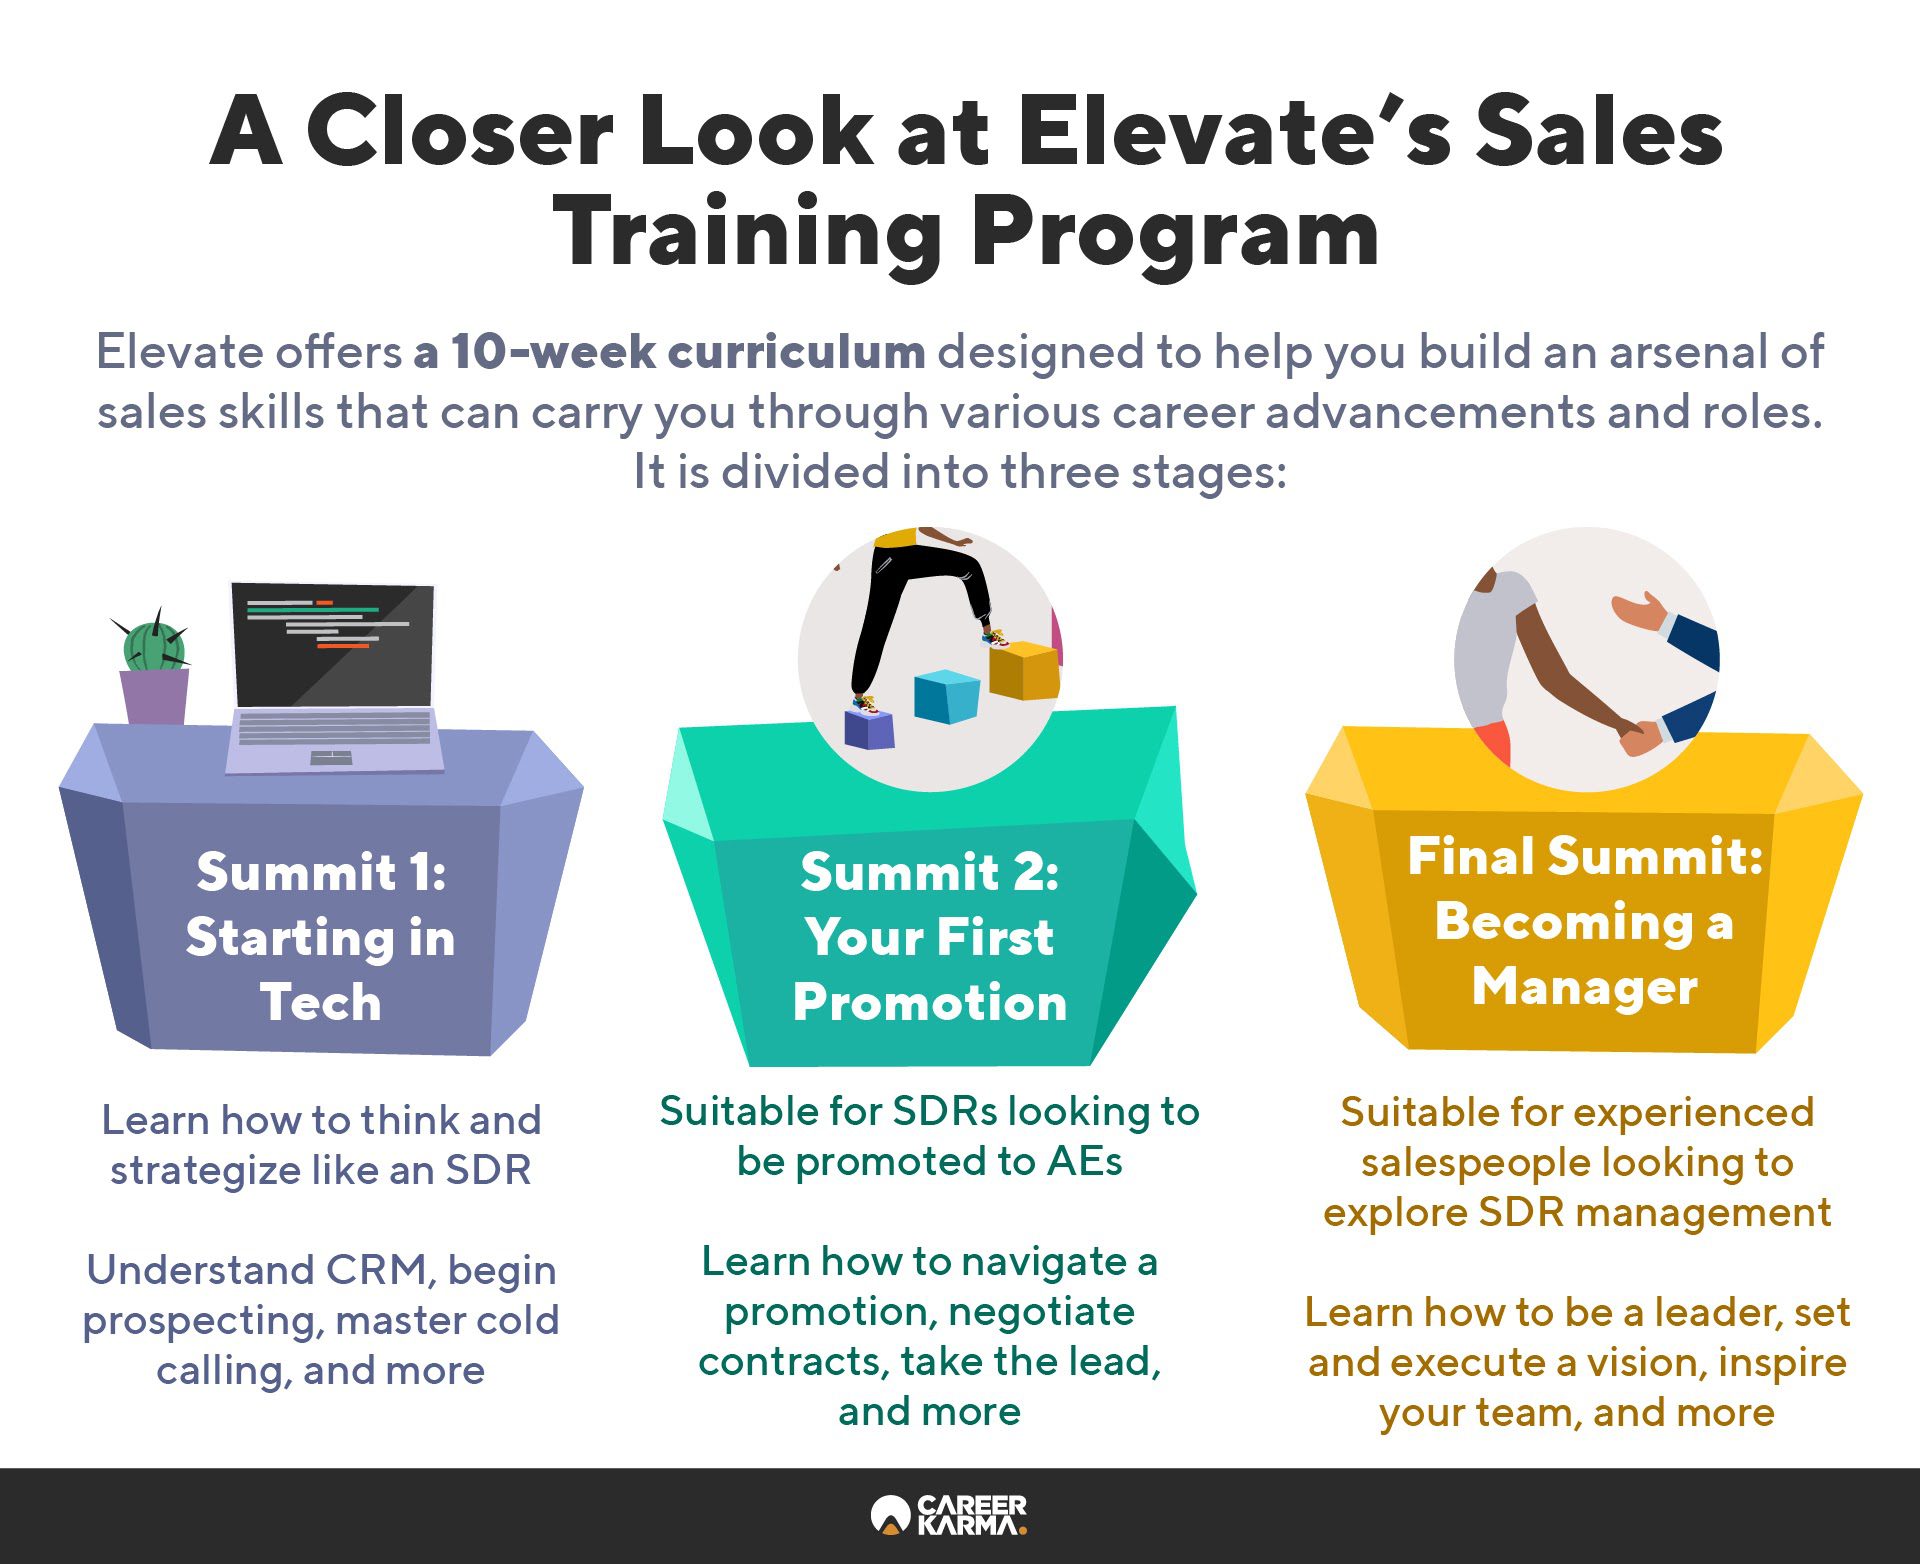 An infographic covering the key features of Elevate’s sales training program